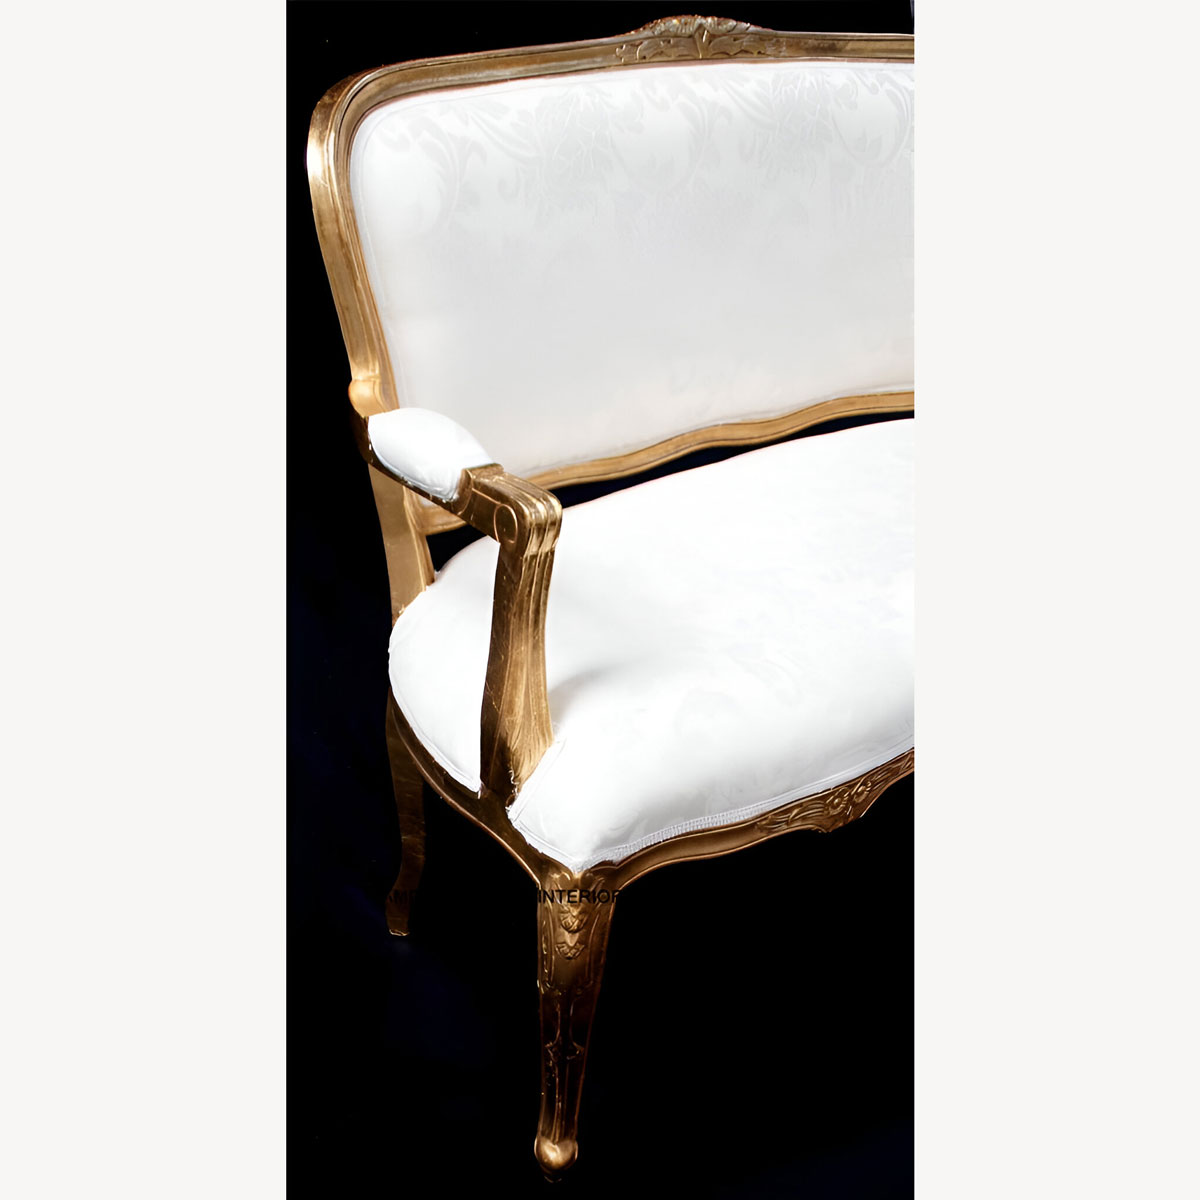 Josephine French Style Small Sofa Double Ended Chaise In Gold And Ivory Cream Damask 4 - Hampshire Barn Interiors - Josephine French Style Small Sofa / Double Ended Chaise In Gold And Ivory Cream Damask -